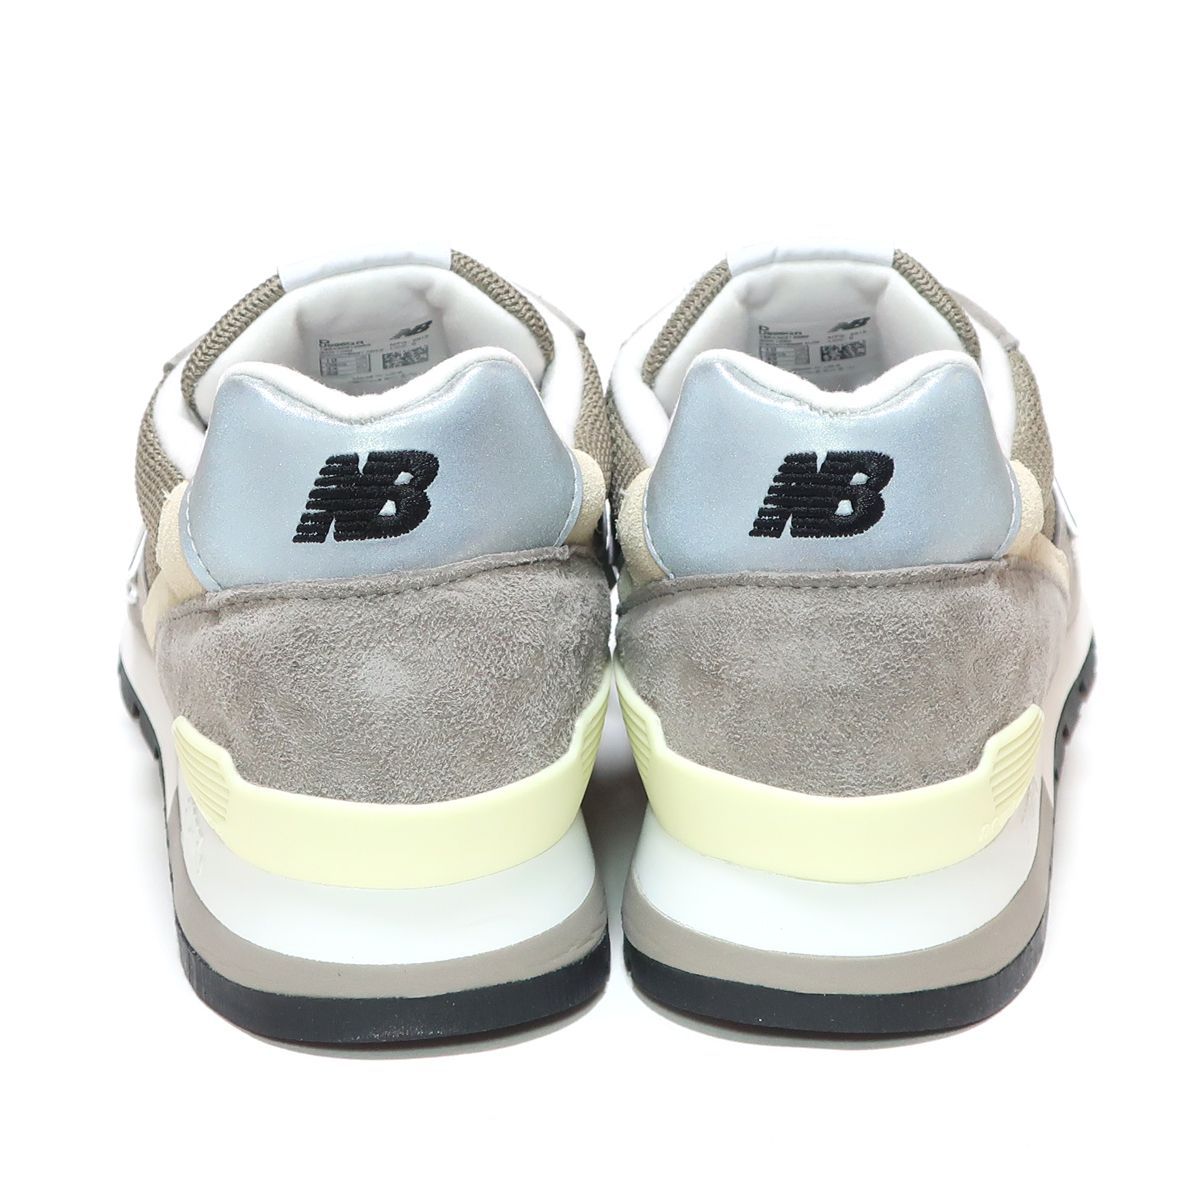 NEW BALANCE U996GR GRAY GREY SUEDE MADE IN USA US12 30cm ( ニューバランス 996 グレー  スエード アメリカ製 )